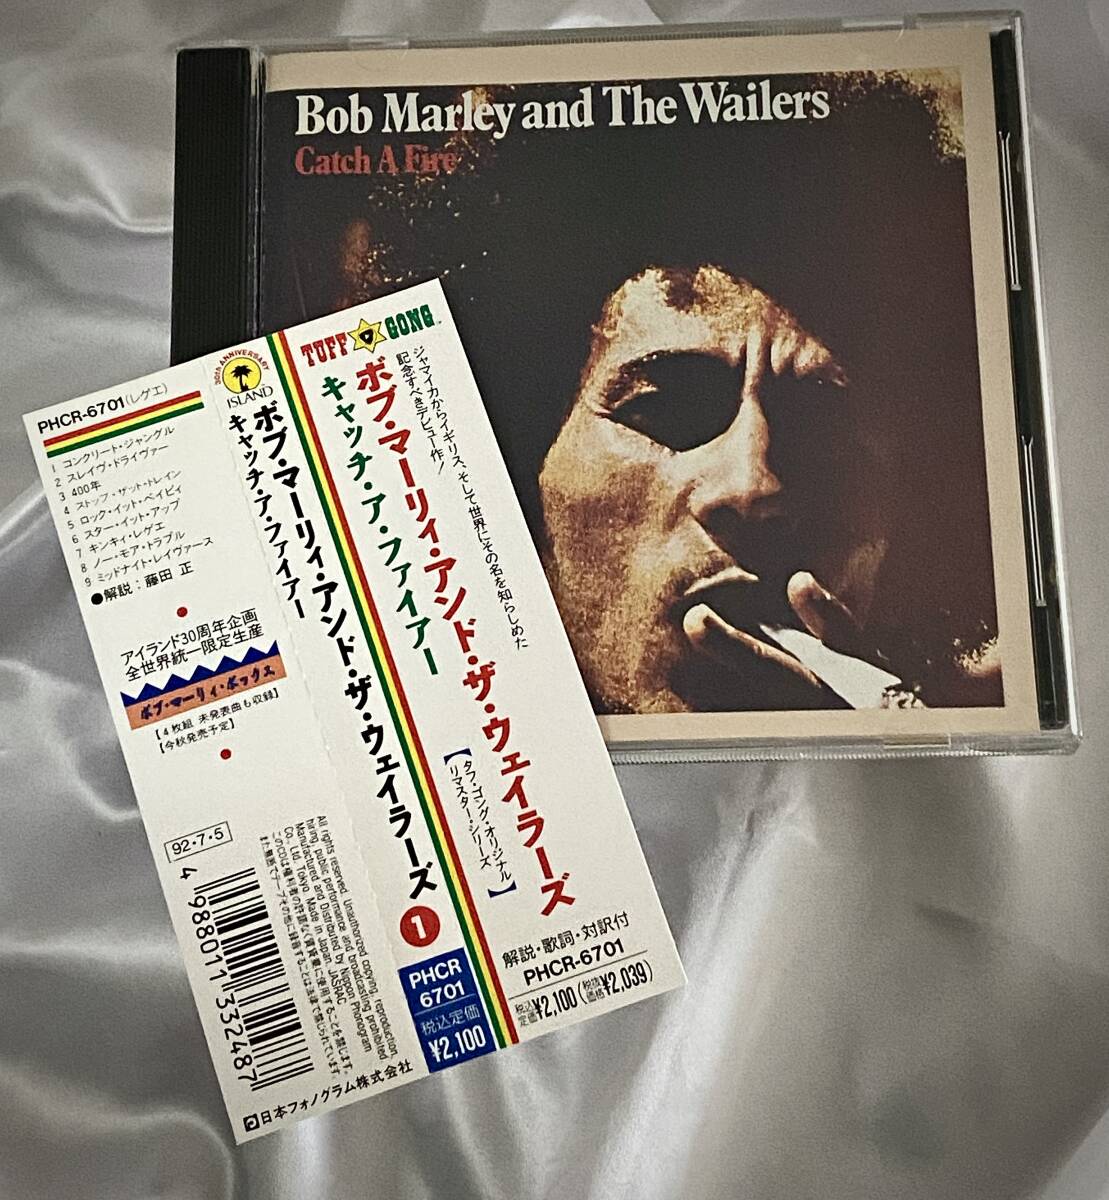 ★Bob Marley And The Wailers Catch A Fireボブマーリィ/キャッチアファイヤー●1992年日本盤PHCR 6701_画像1